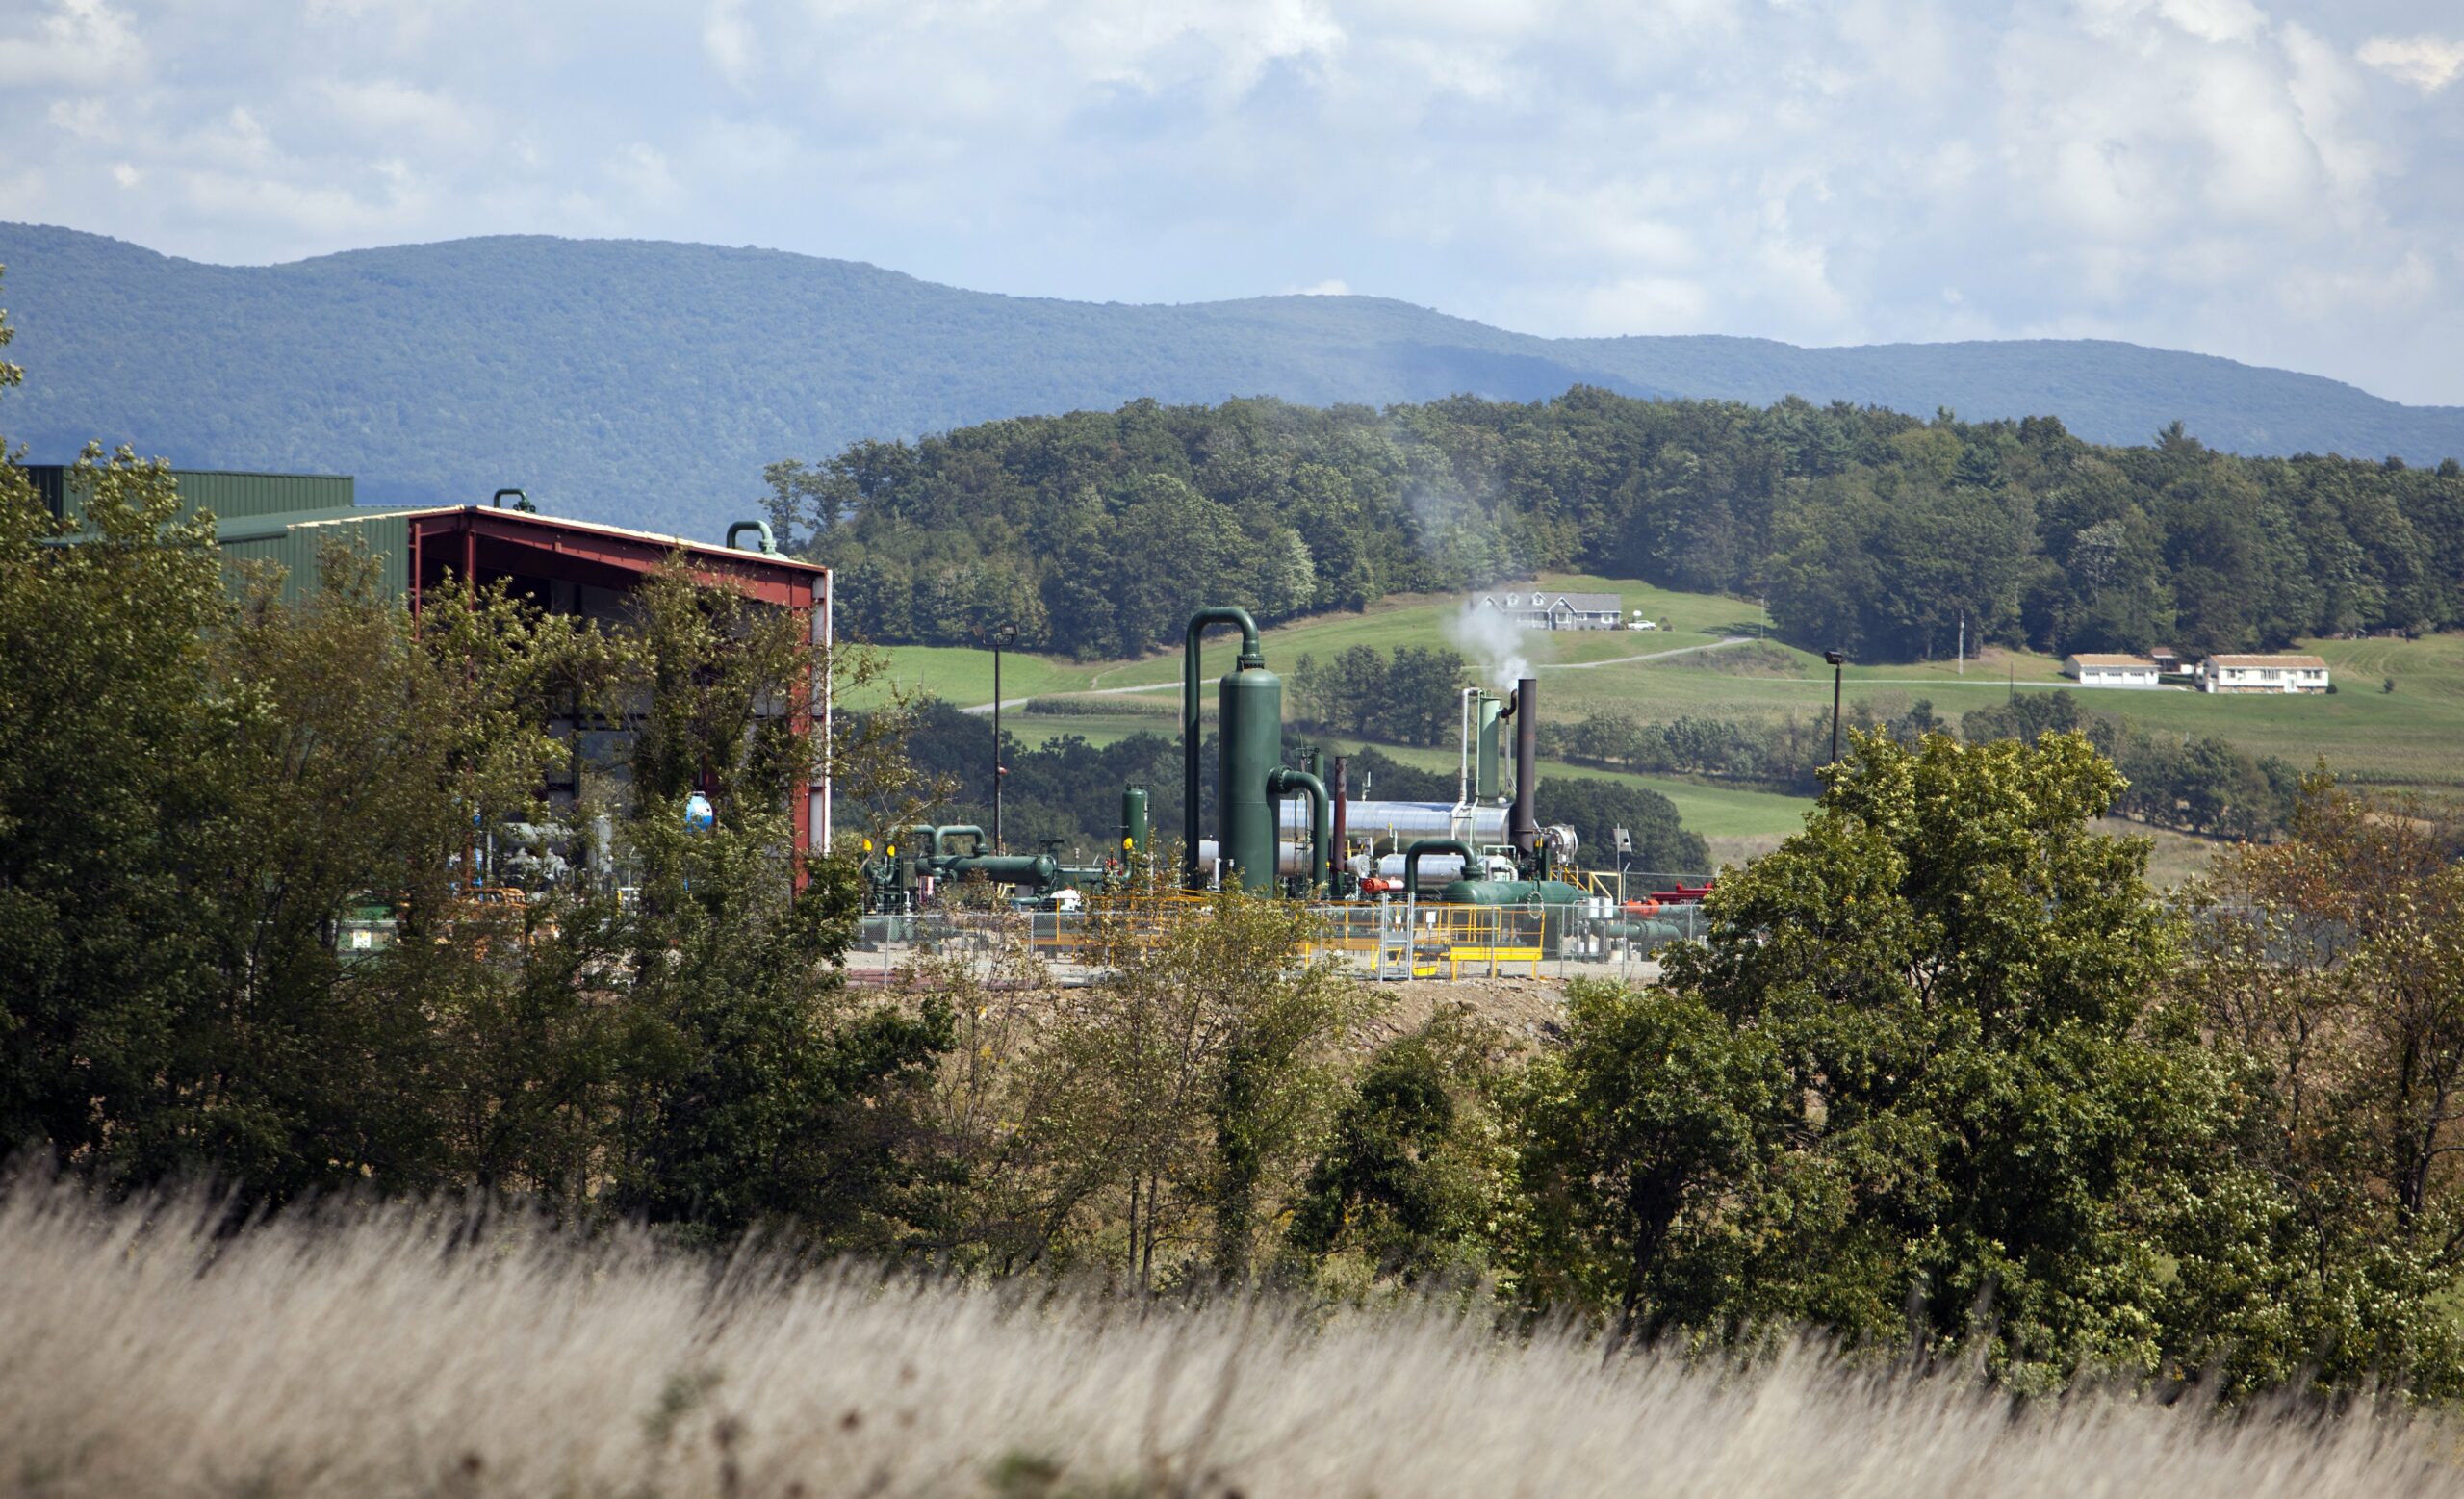 A natural gas compressor station on a hillside Septem in Penn Township, Pennsylvania. The area is situated above the Marcellus Shale, where a process called hydraulic fracturing, or fracking, pumps millions of gallons of water, sand and chemicals into horizontally drilled wells to stimulate the release of the gas. Credit: Robert Nickelsberg/Getty Images.